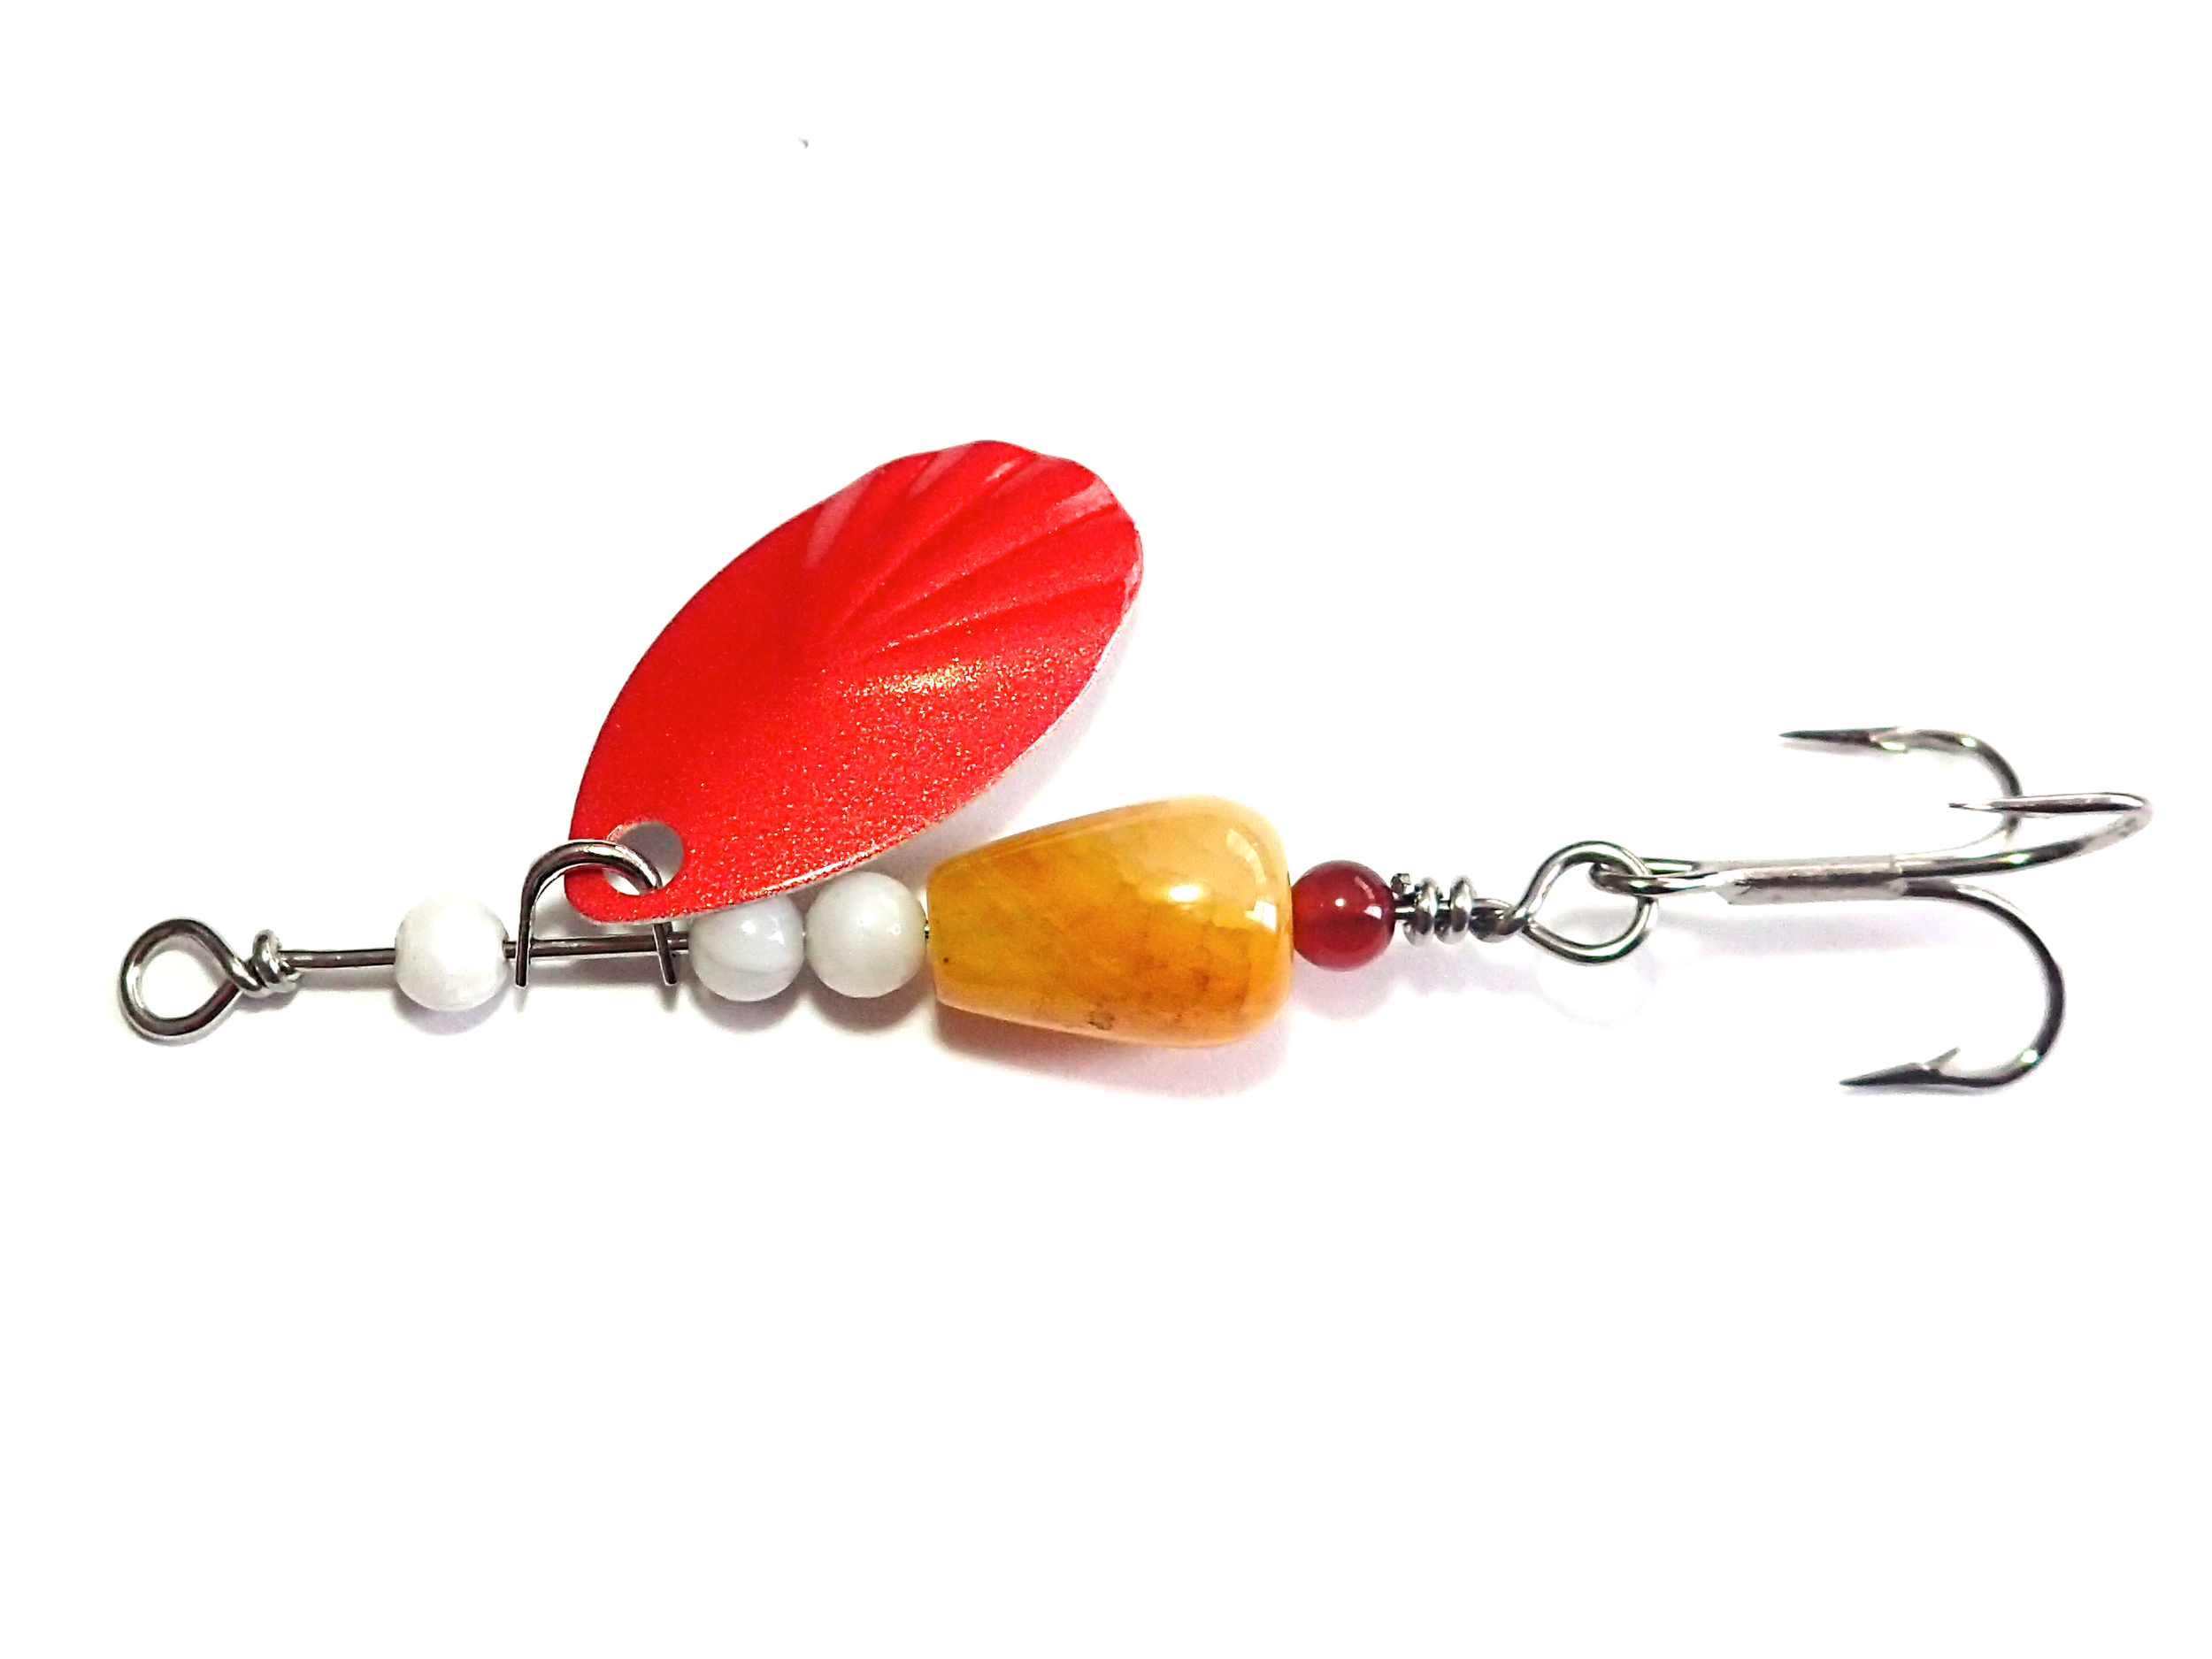 SHOP  CANADIAN FISHING LURES — DEAD END LURES